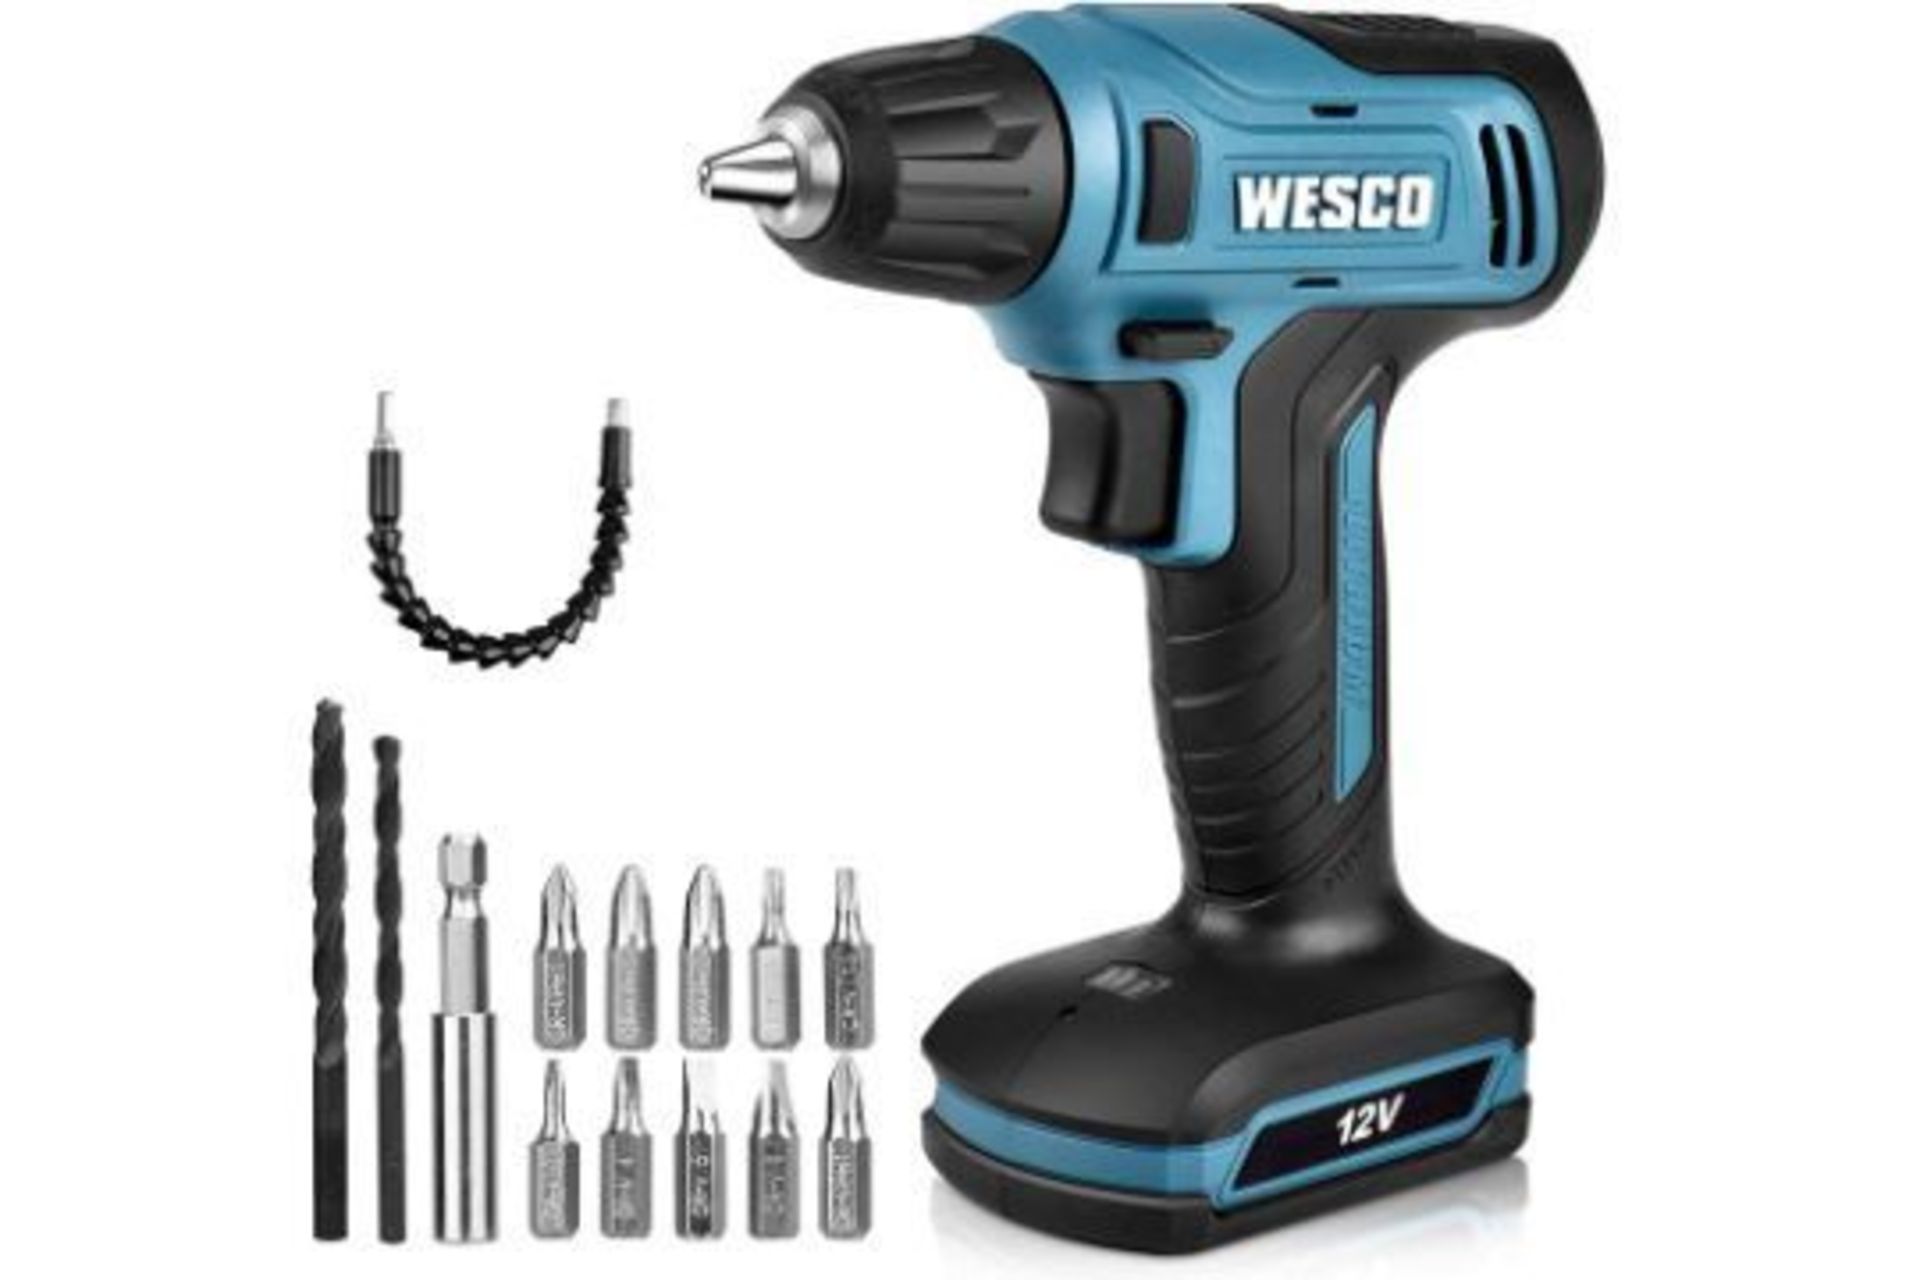 2 x New Boxed WESCO Cordless Drill and Screwdriver Set, 12V Electric Screwdriver, 12 Torque Electric - Image 2 of 2